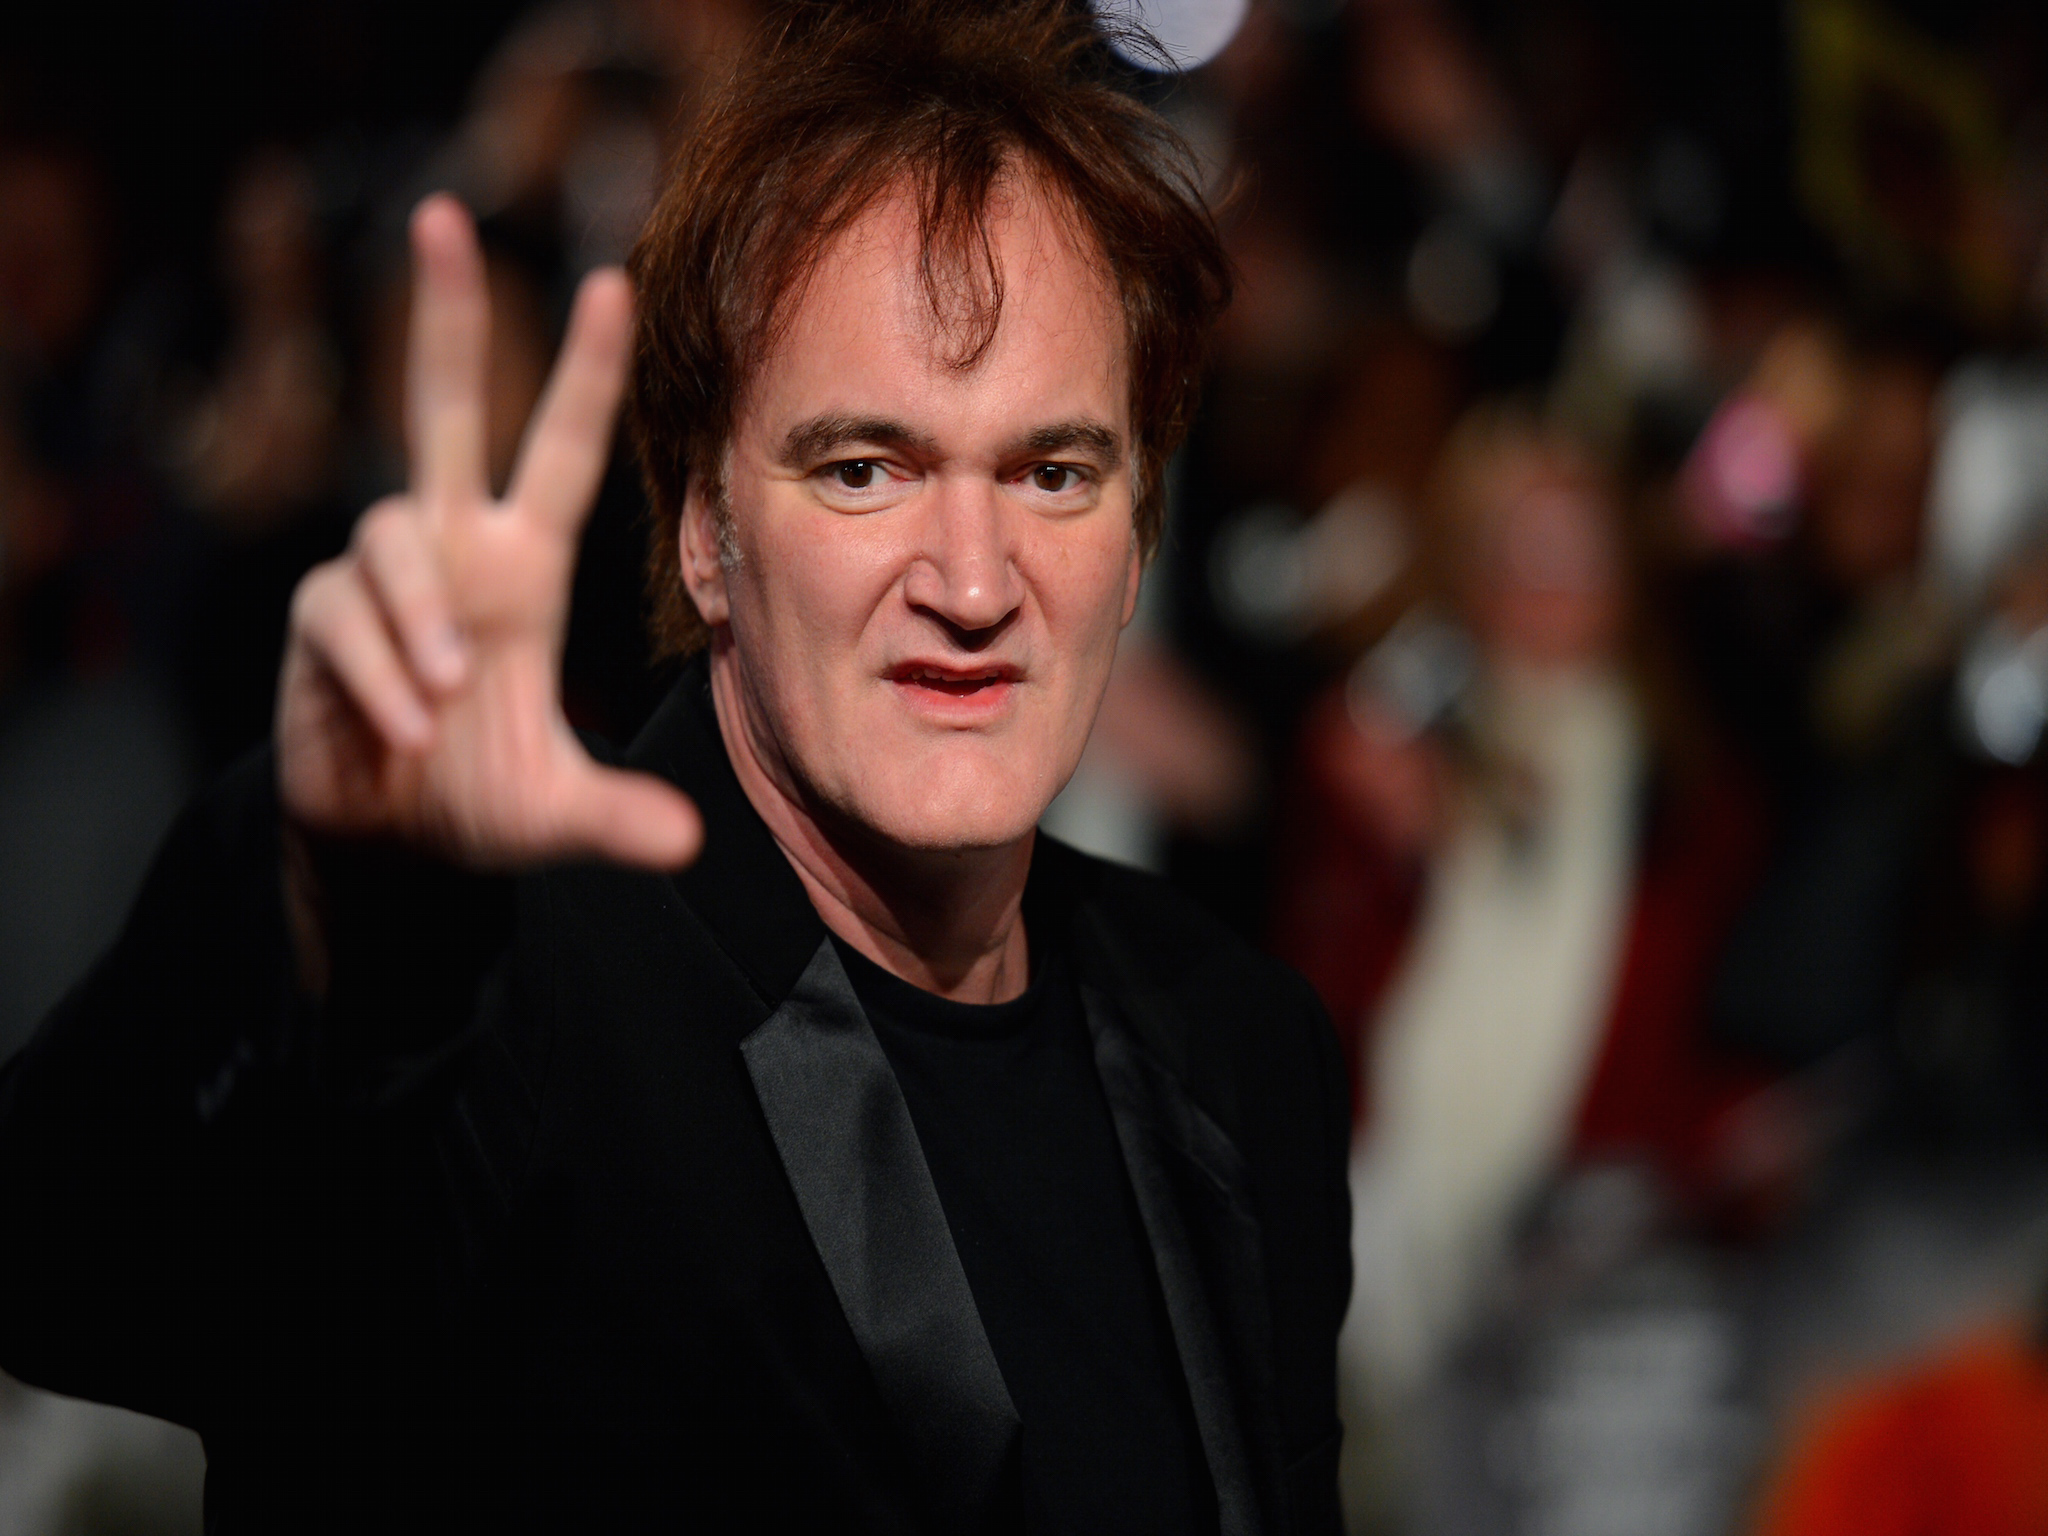 Quentin Tarantino filmed parts of Django Unchained at the property